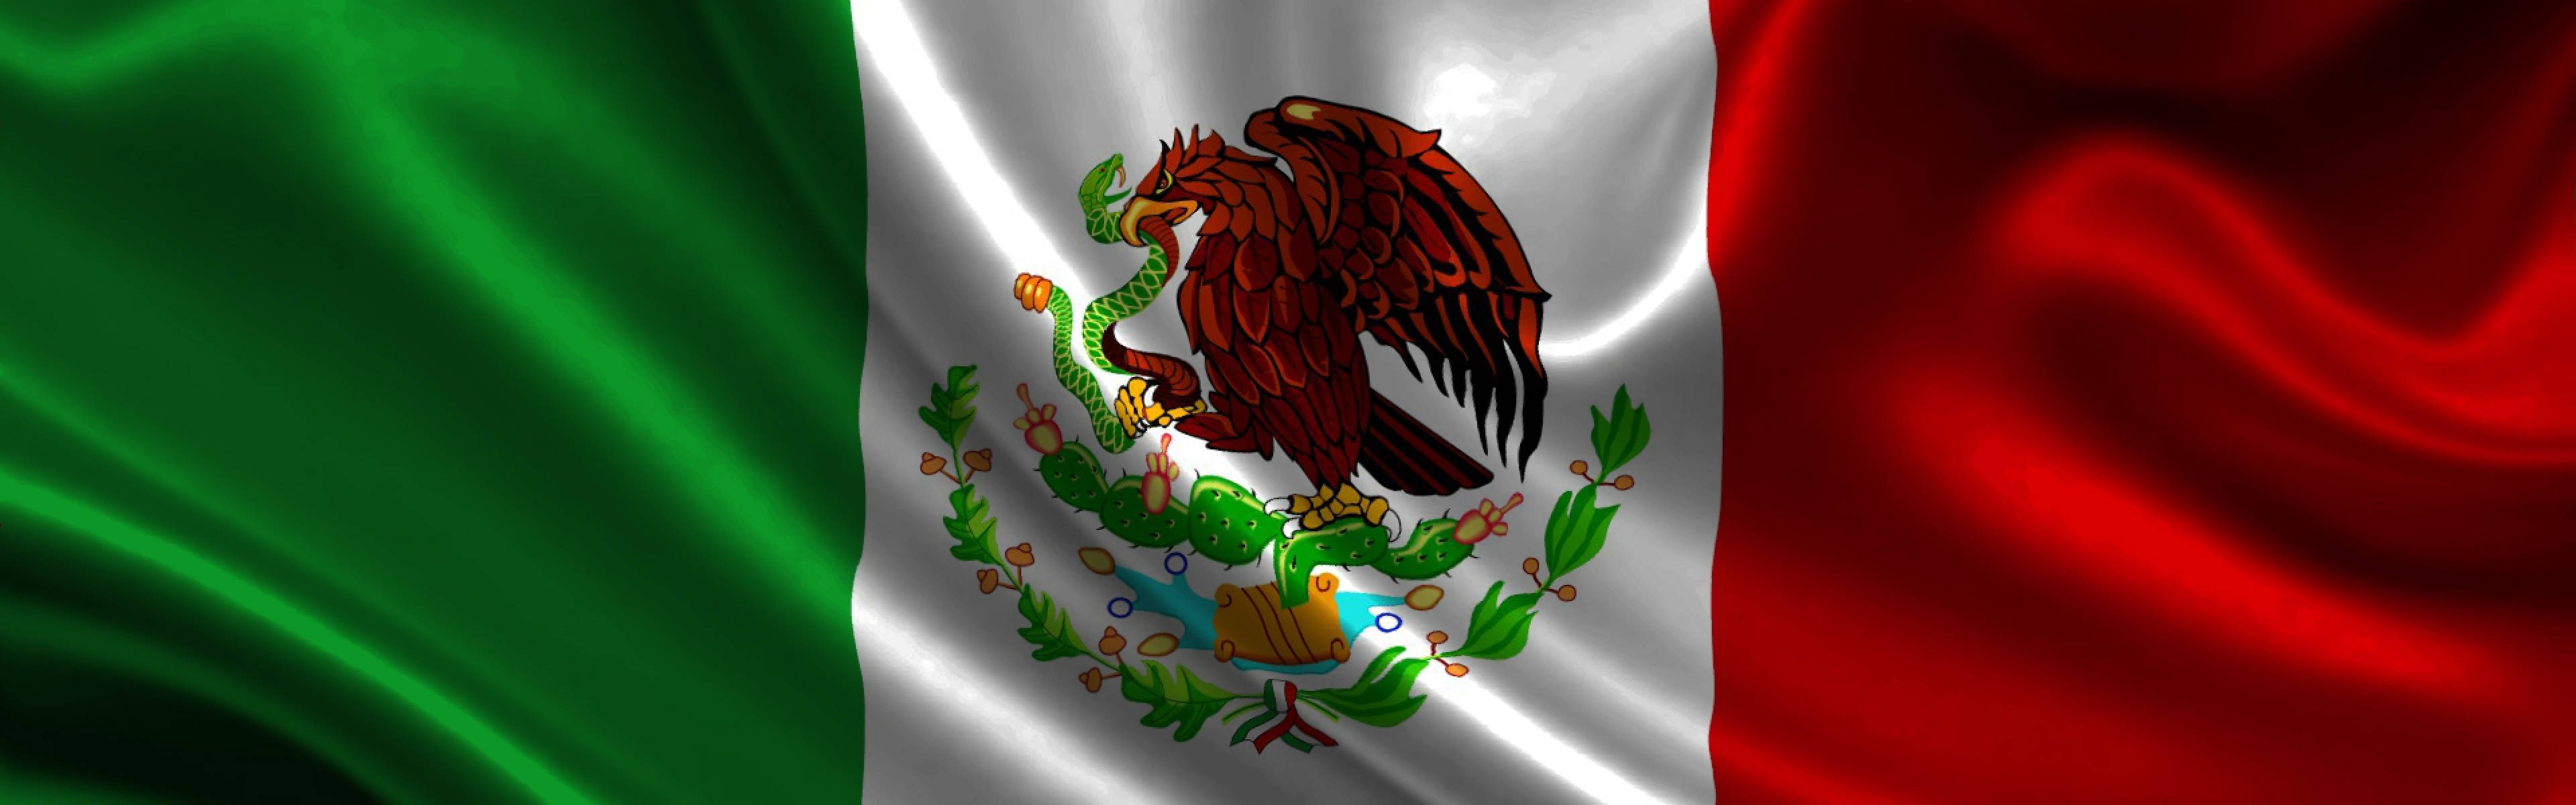 3840X1200 Mexico Flag Wallpaper and Background